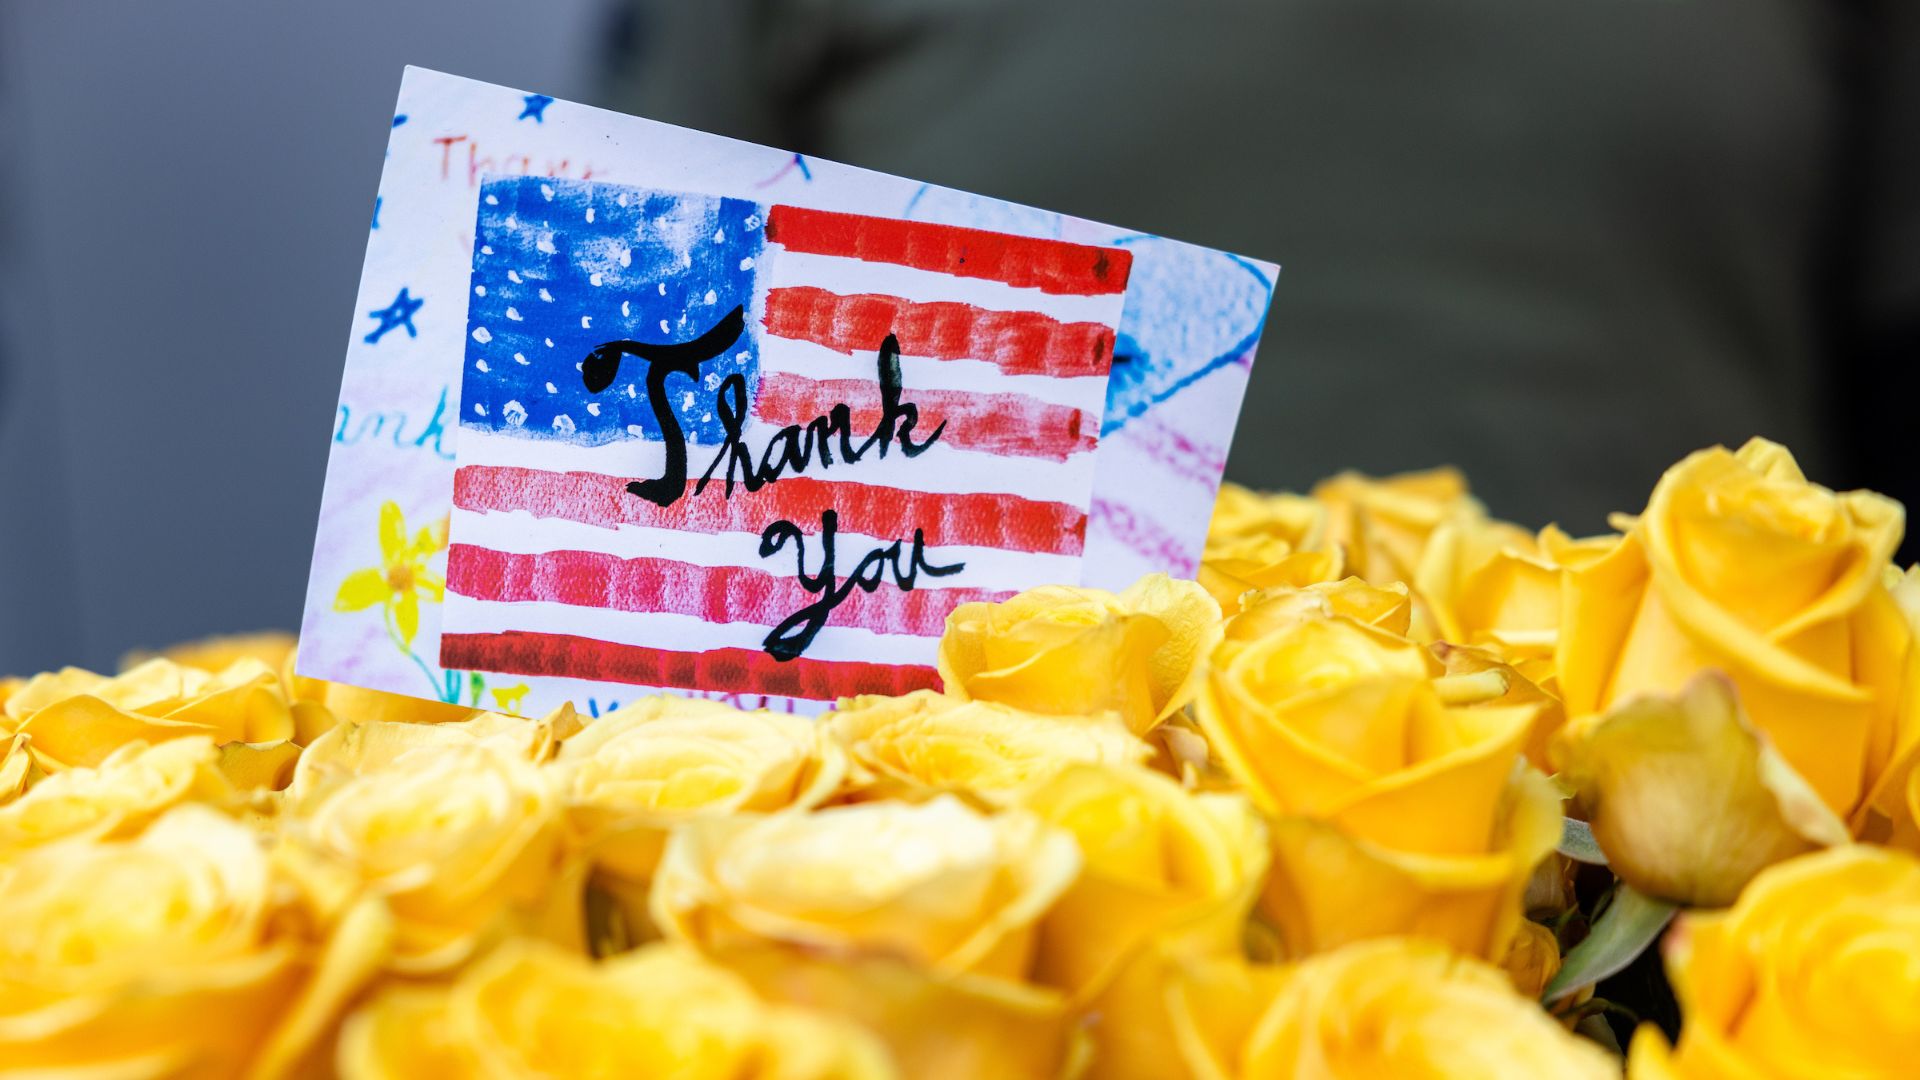 Close-up of yellow roses with an image that shows the American flag and the text THANK YOU